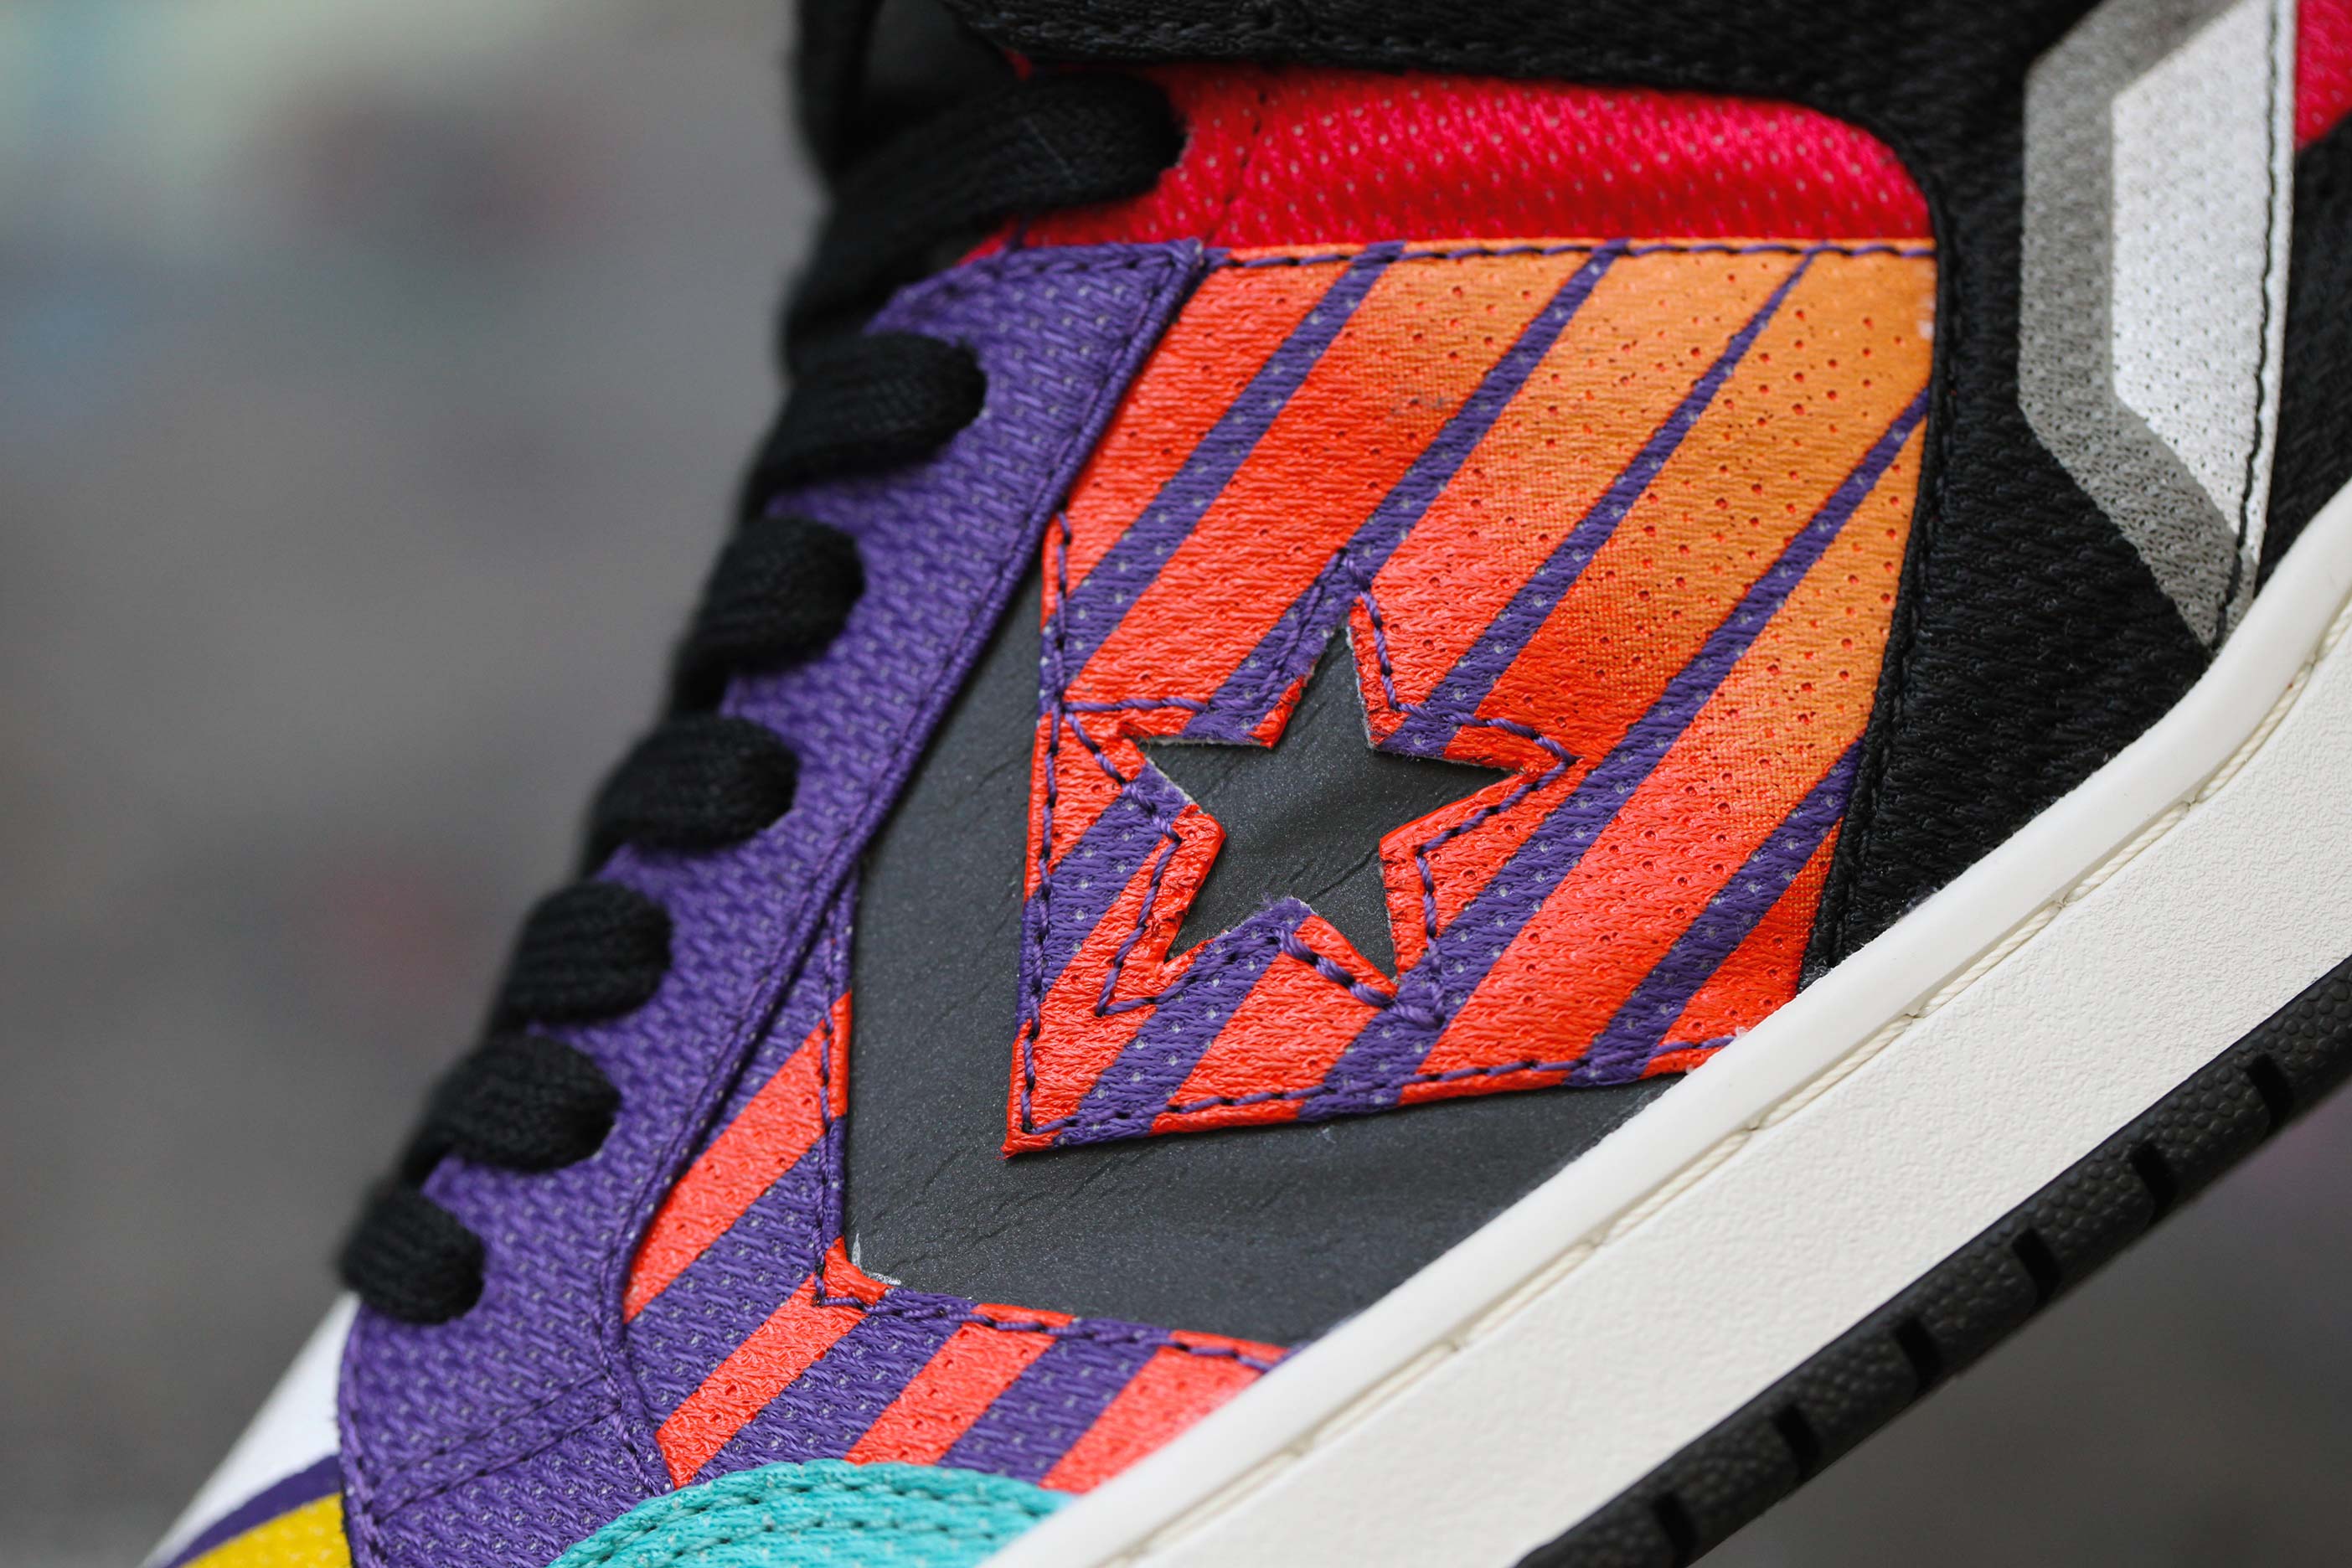 A Detailed Look at the Converse CONS Weapon "Patchwork"